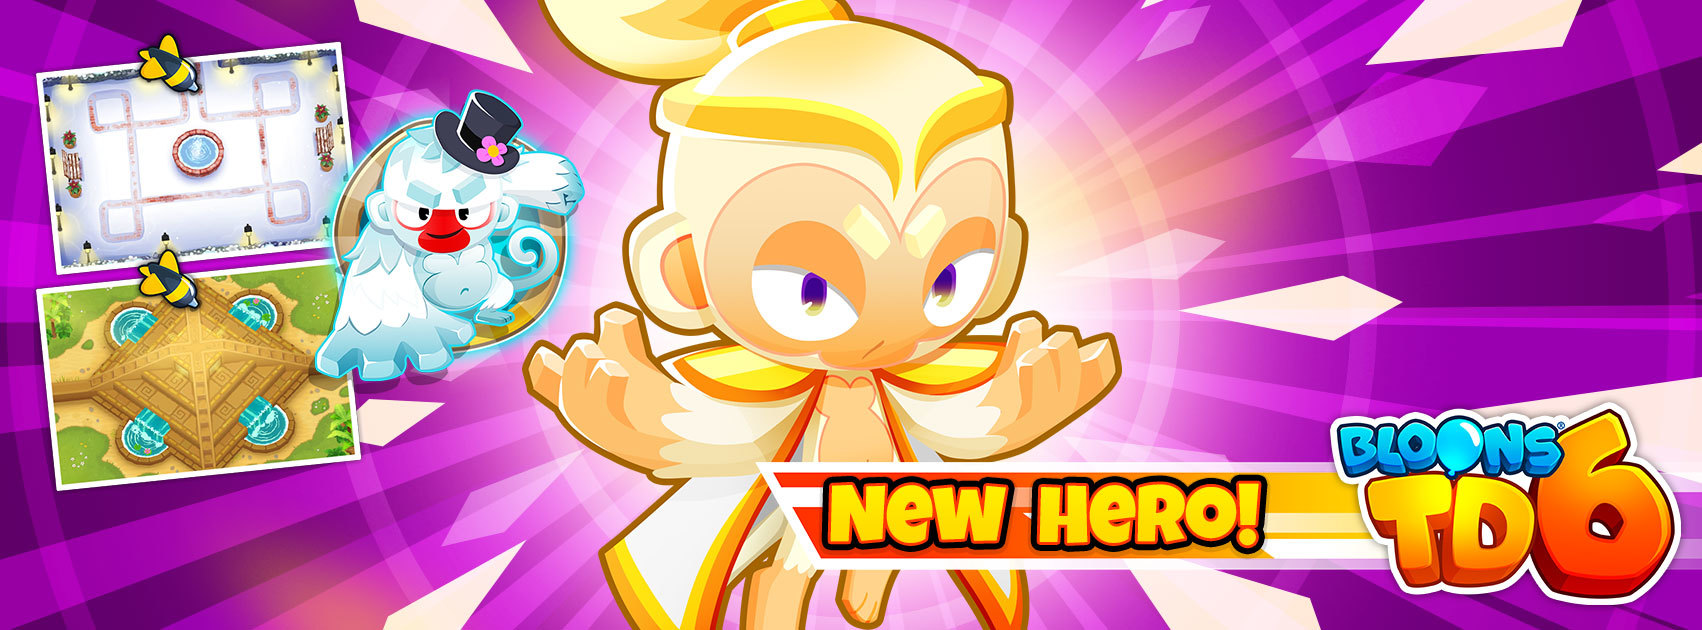 Bloons TD 6 - Bloons TD 6 - Patch Notes! Version 14.0 - Steam News